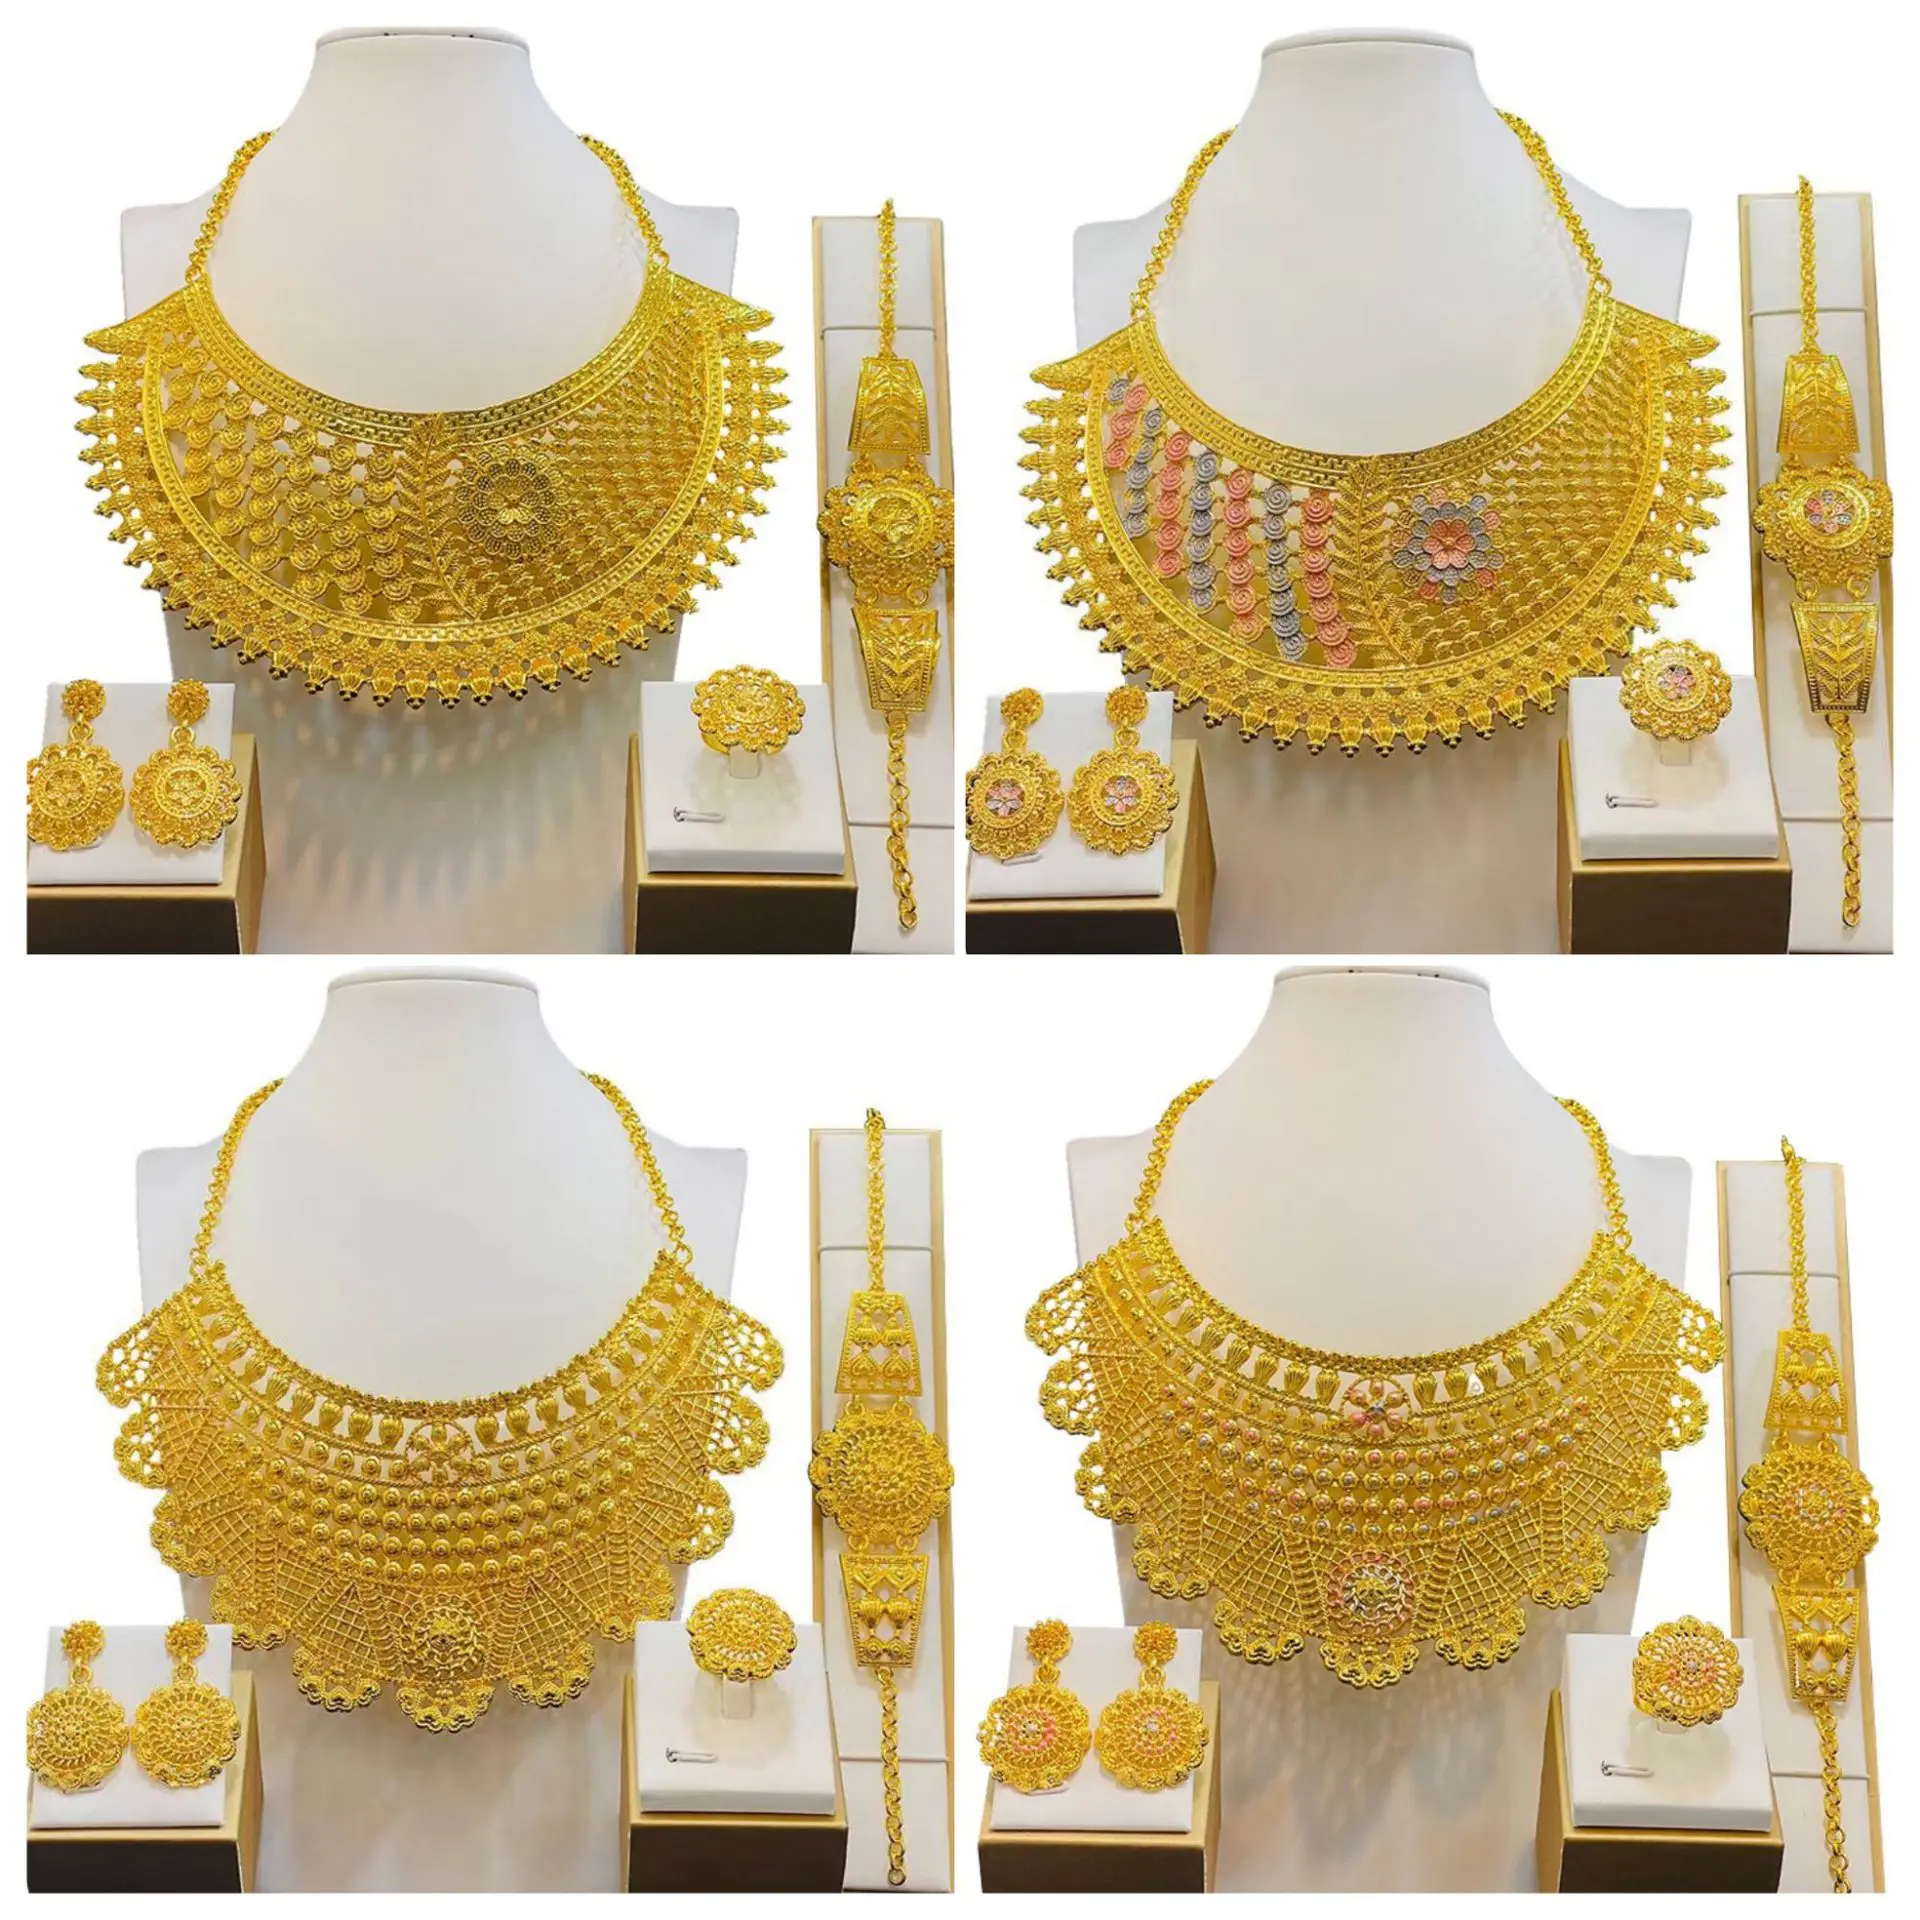 

24K Gold 4PCS Color Jewelry Sets For Women Necklace Earrings Dubai African Indian Bridal Accessory Flowers Gift Thailand Vietnam